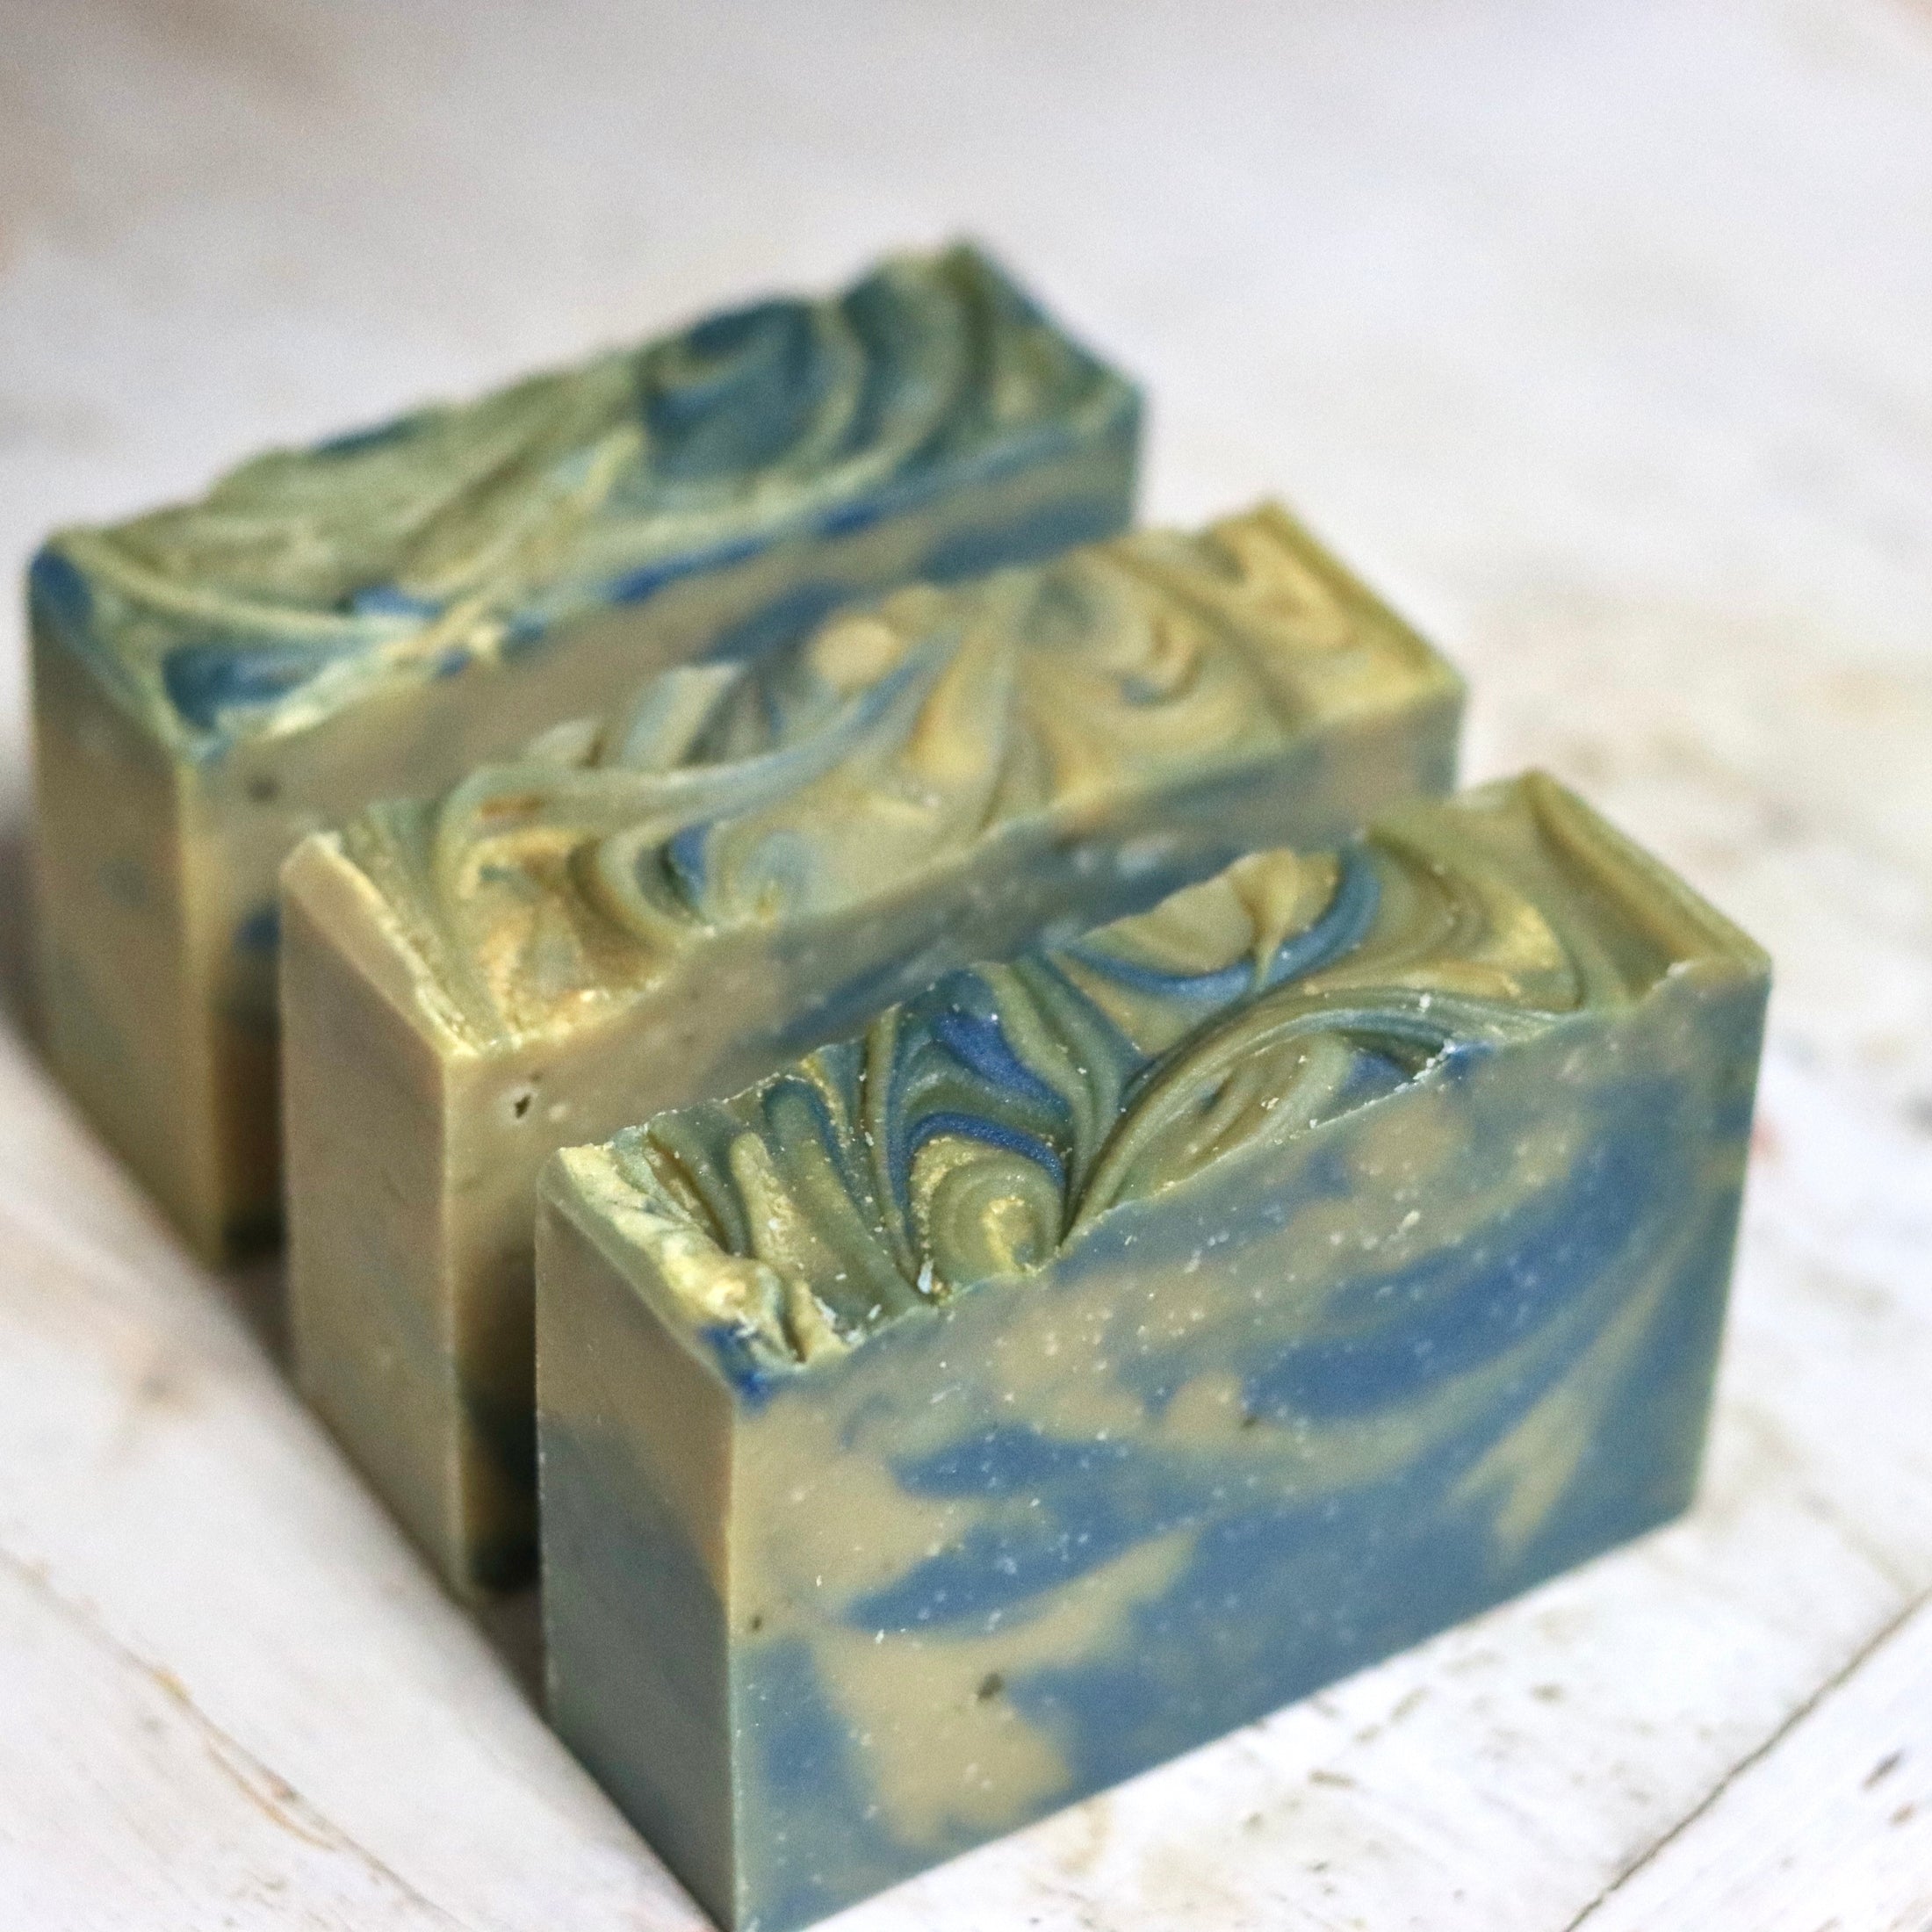 All Natural Cold Process Handmade Bar Soap - Blueberry & Thyme